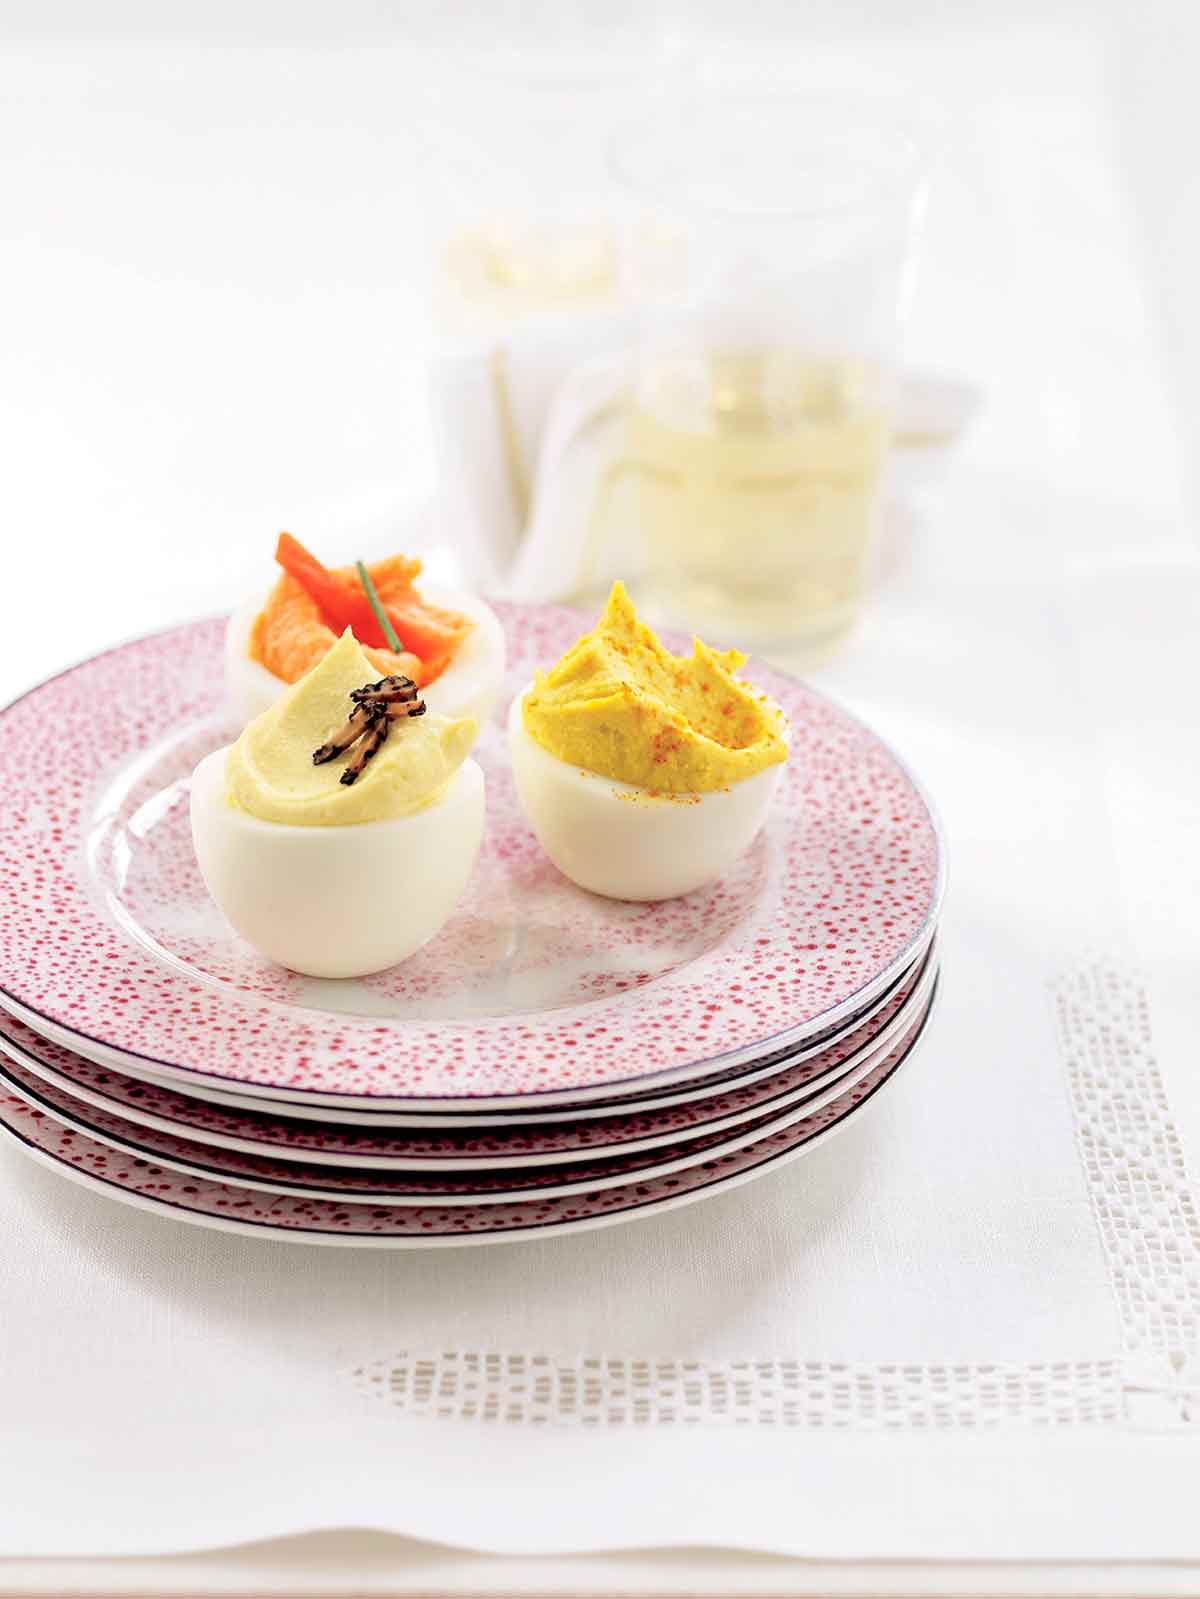 A plate with a trio of deviled eggs - horseradish deviled egg, truffled deviled egg, and smoked salmon deviled egg.